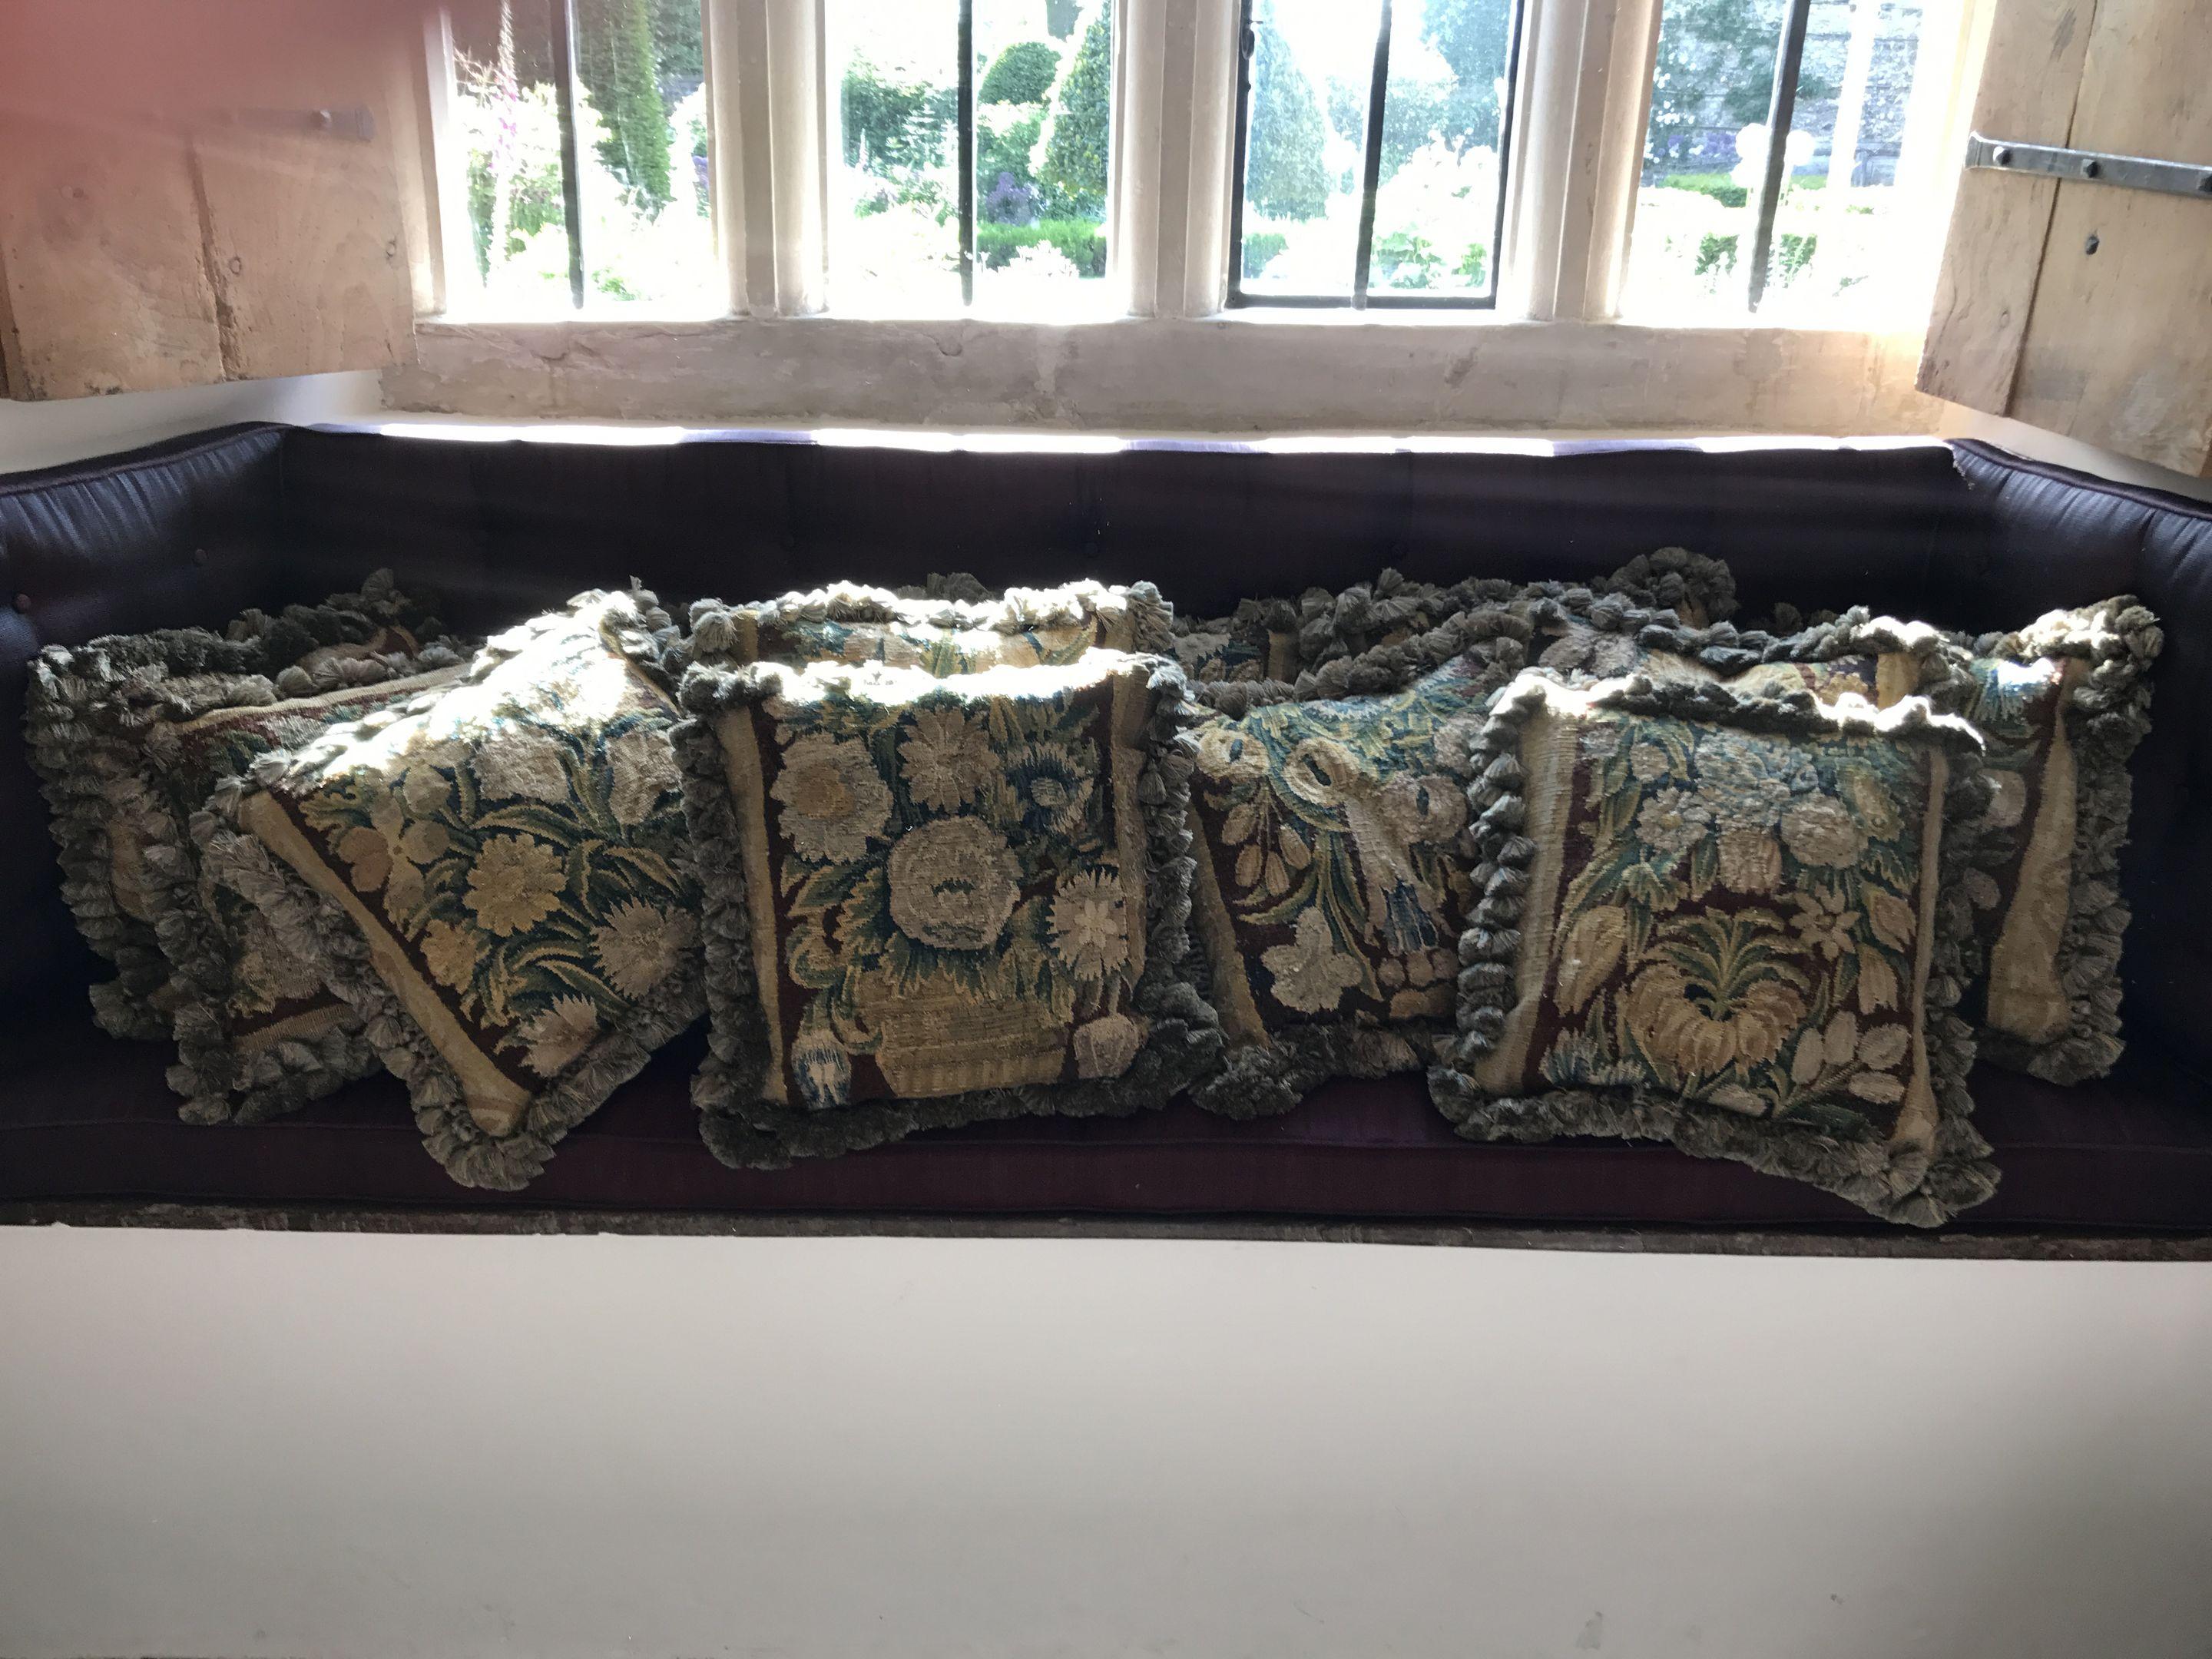 These pillows or cushions are made from two complete borders of a 17th century verdure tapestry so they are in aesthetic harmony. They depict profuse floral sprays and each cushion has a good pictorial composition. They have been cleaned and